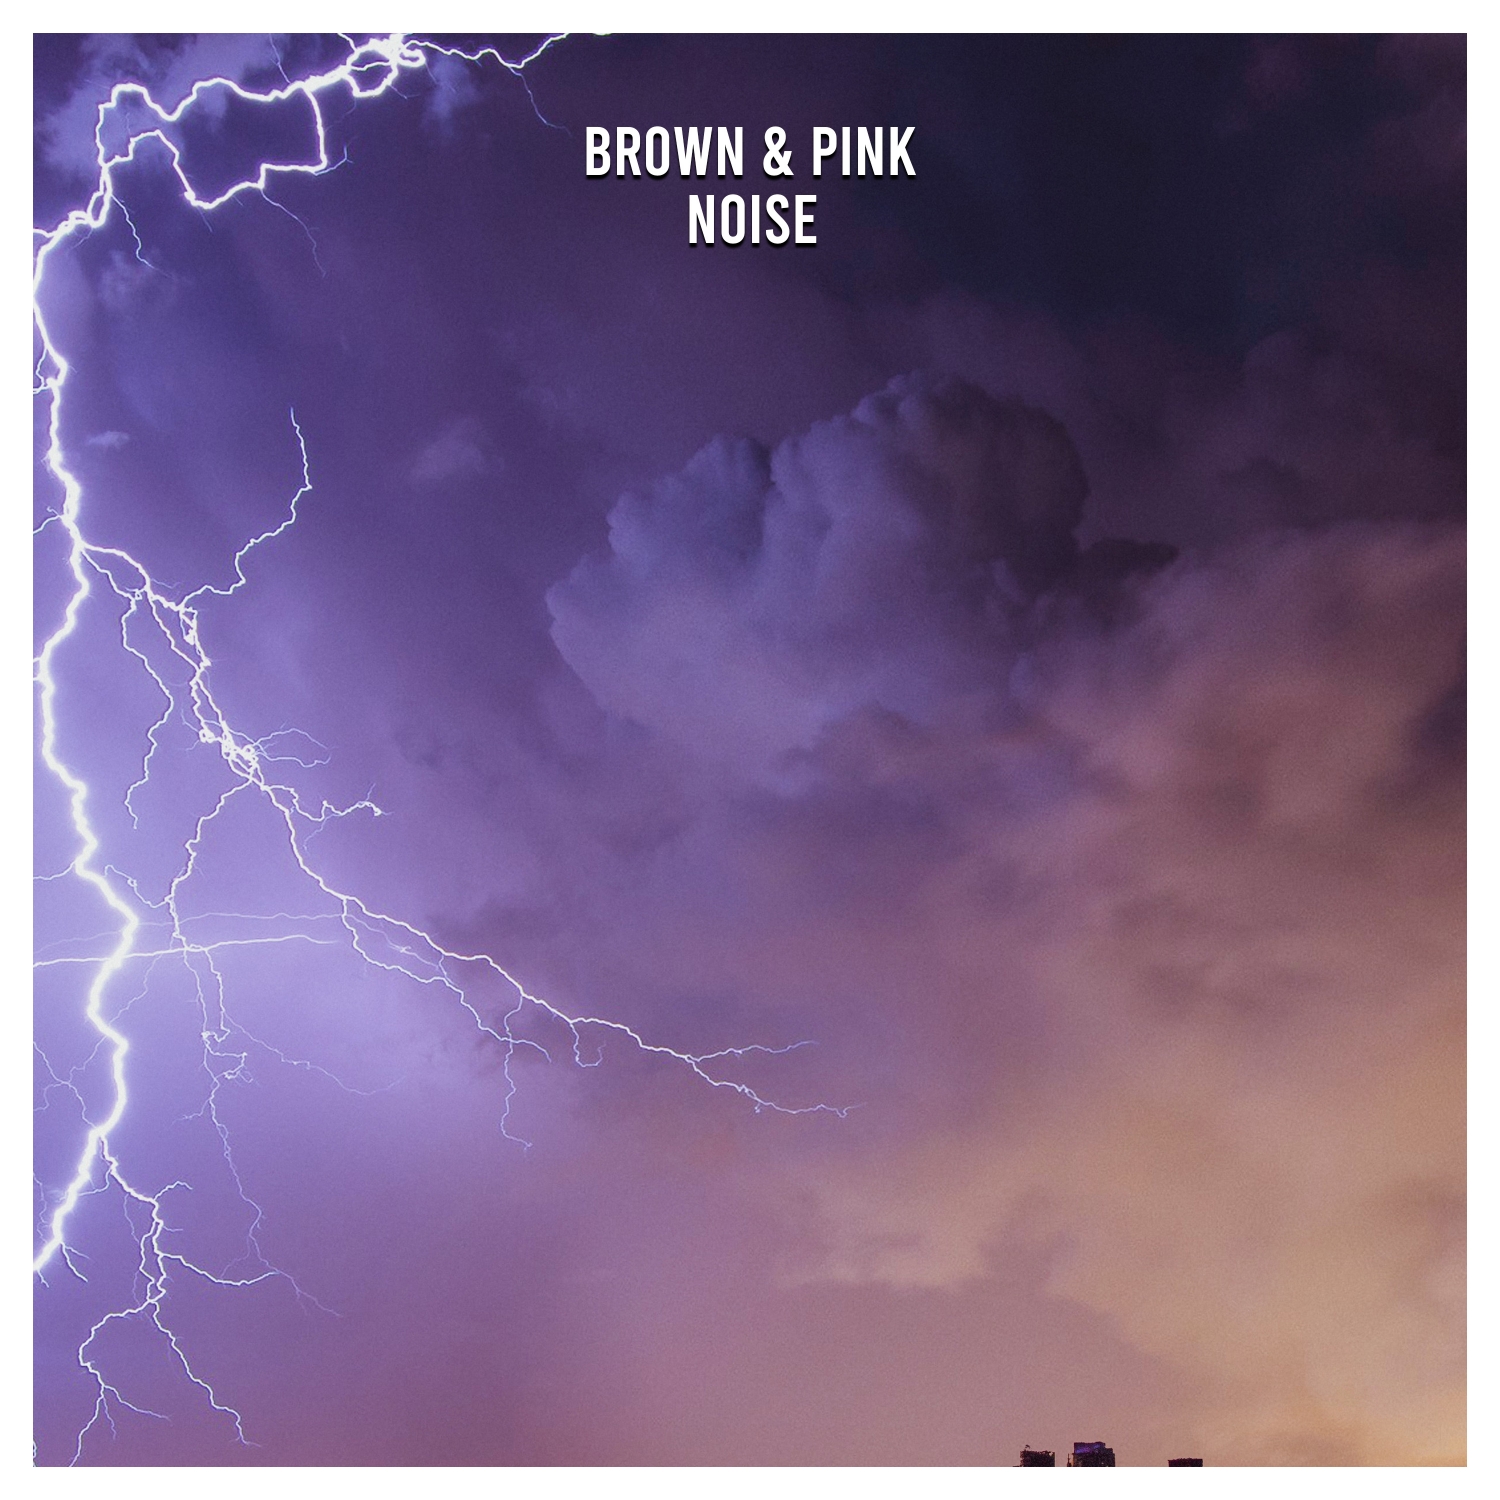 15 Brown and Pink Noises from Rain and Nature